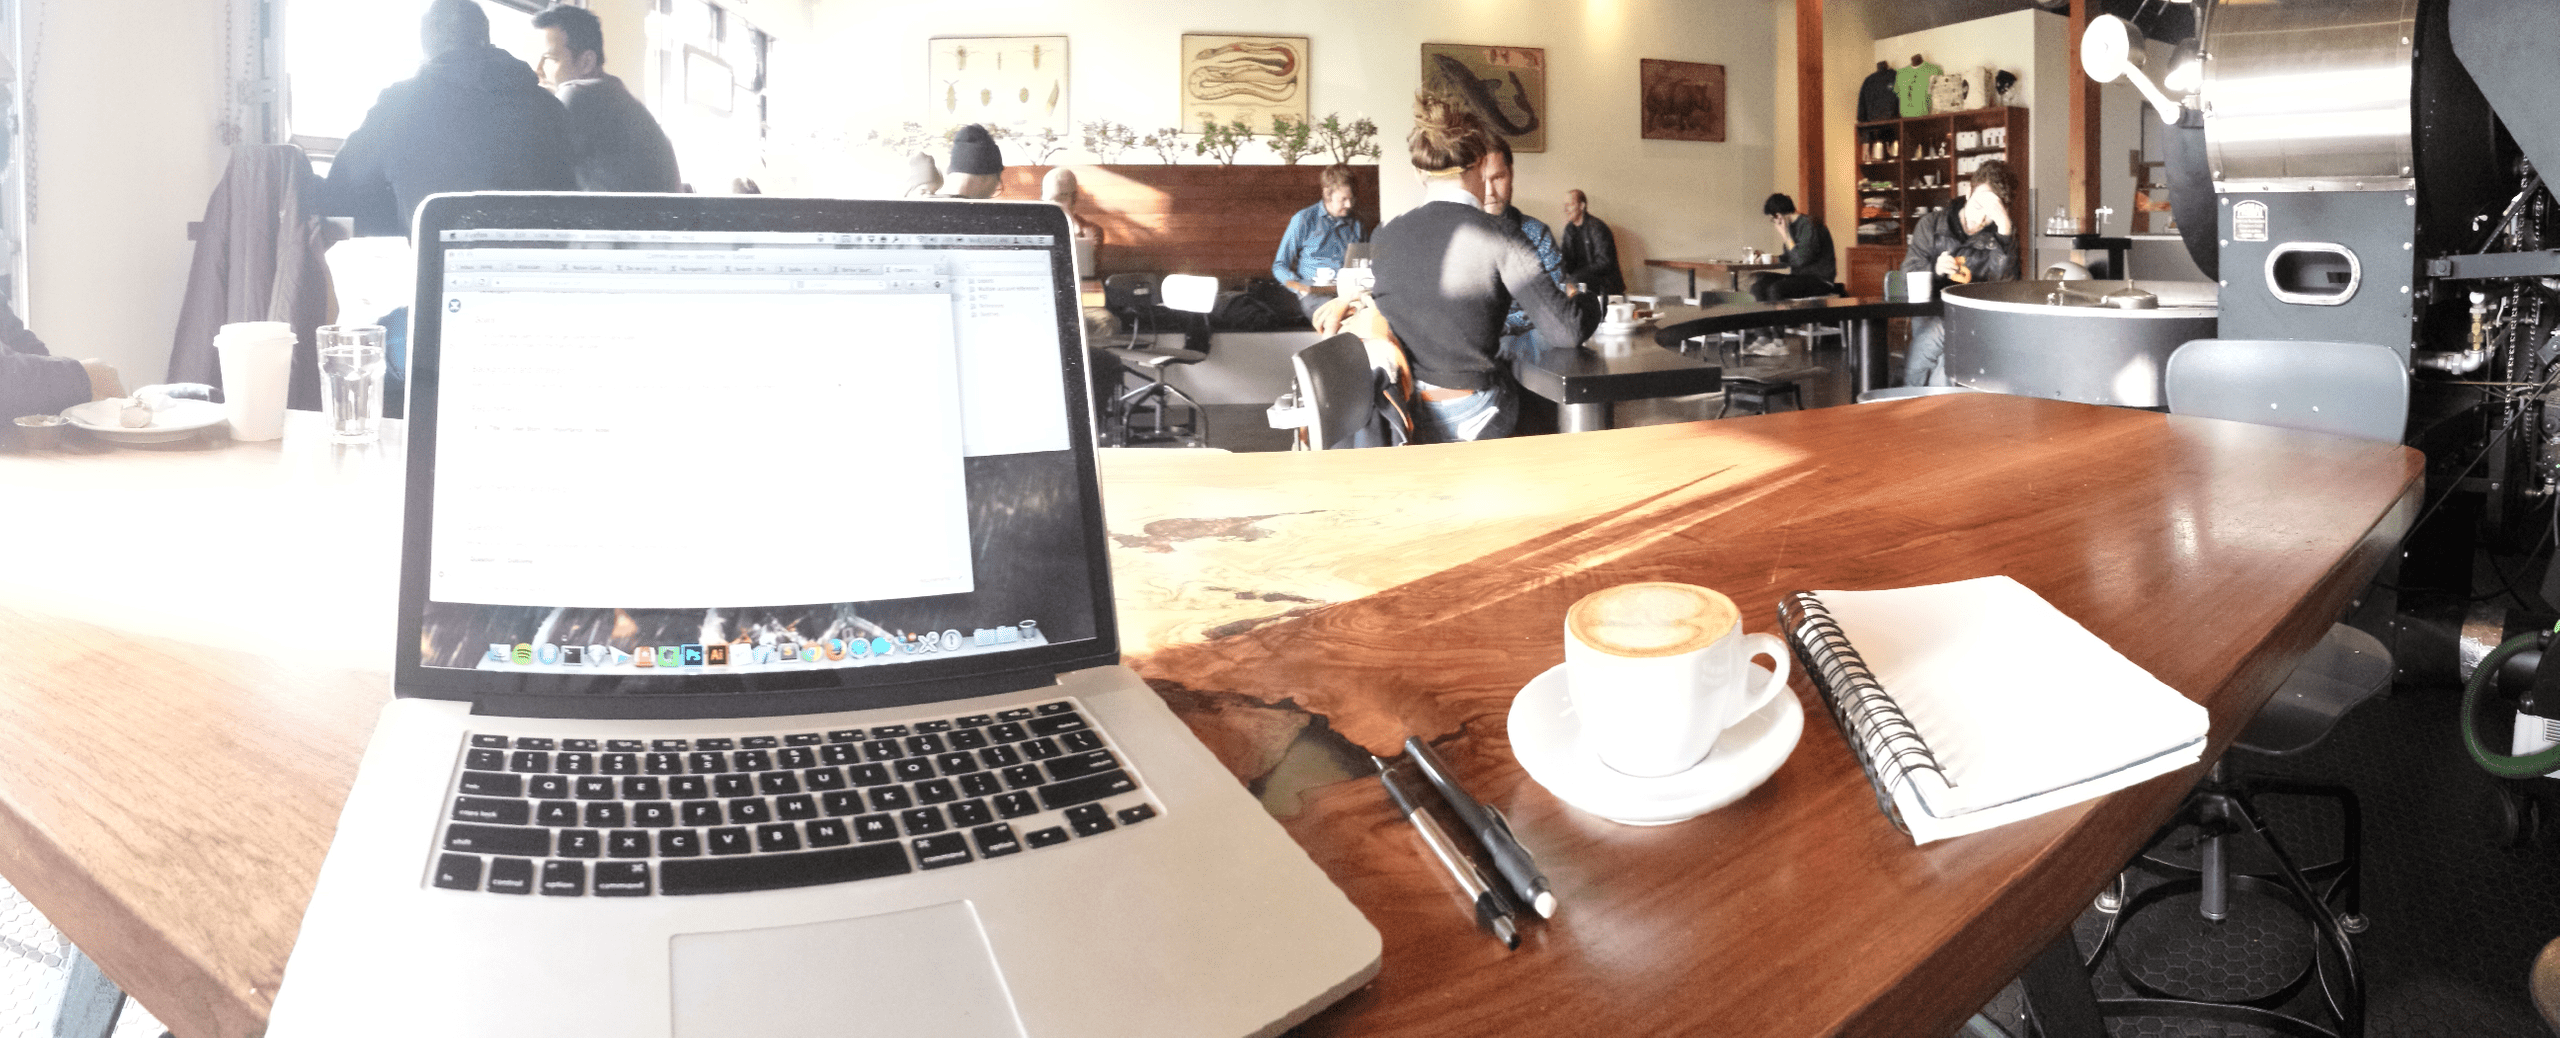 Working remotely from Portland